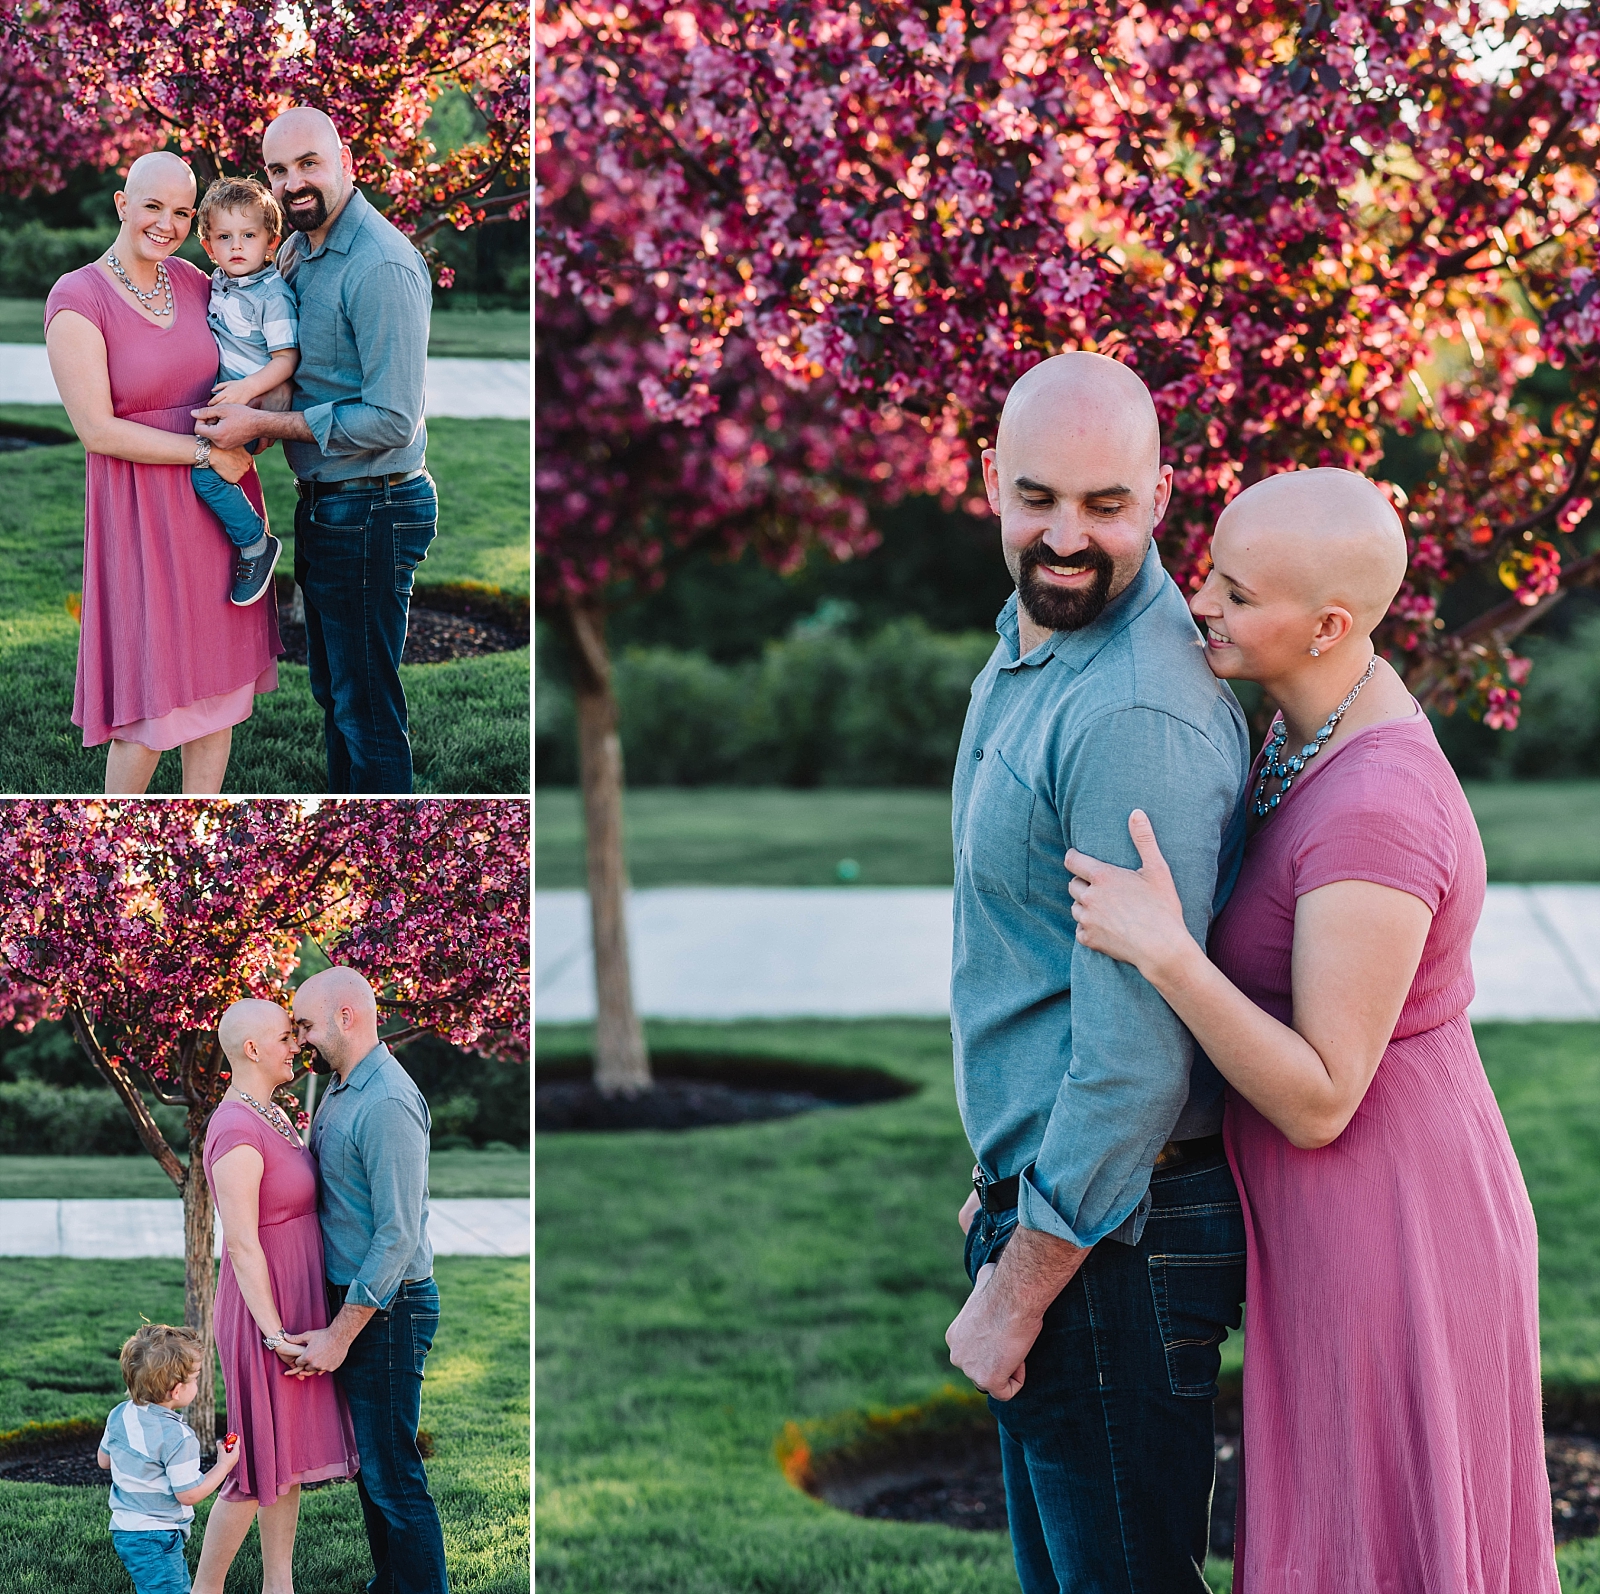 bald beauty breast cancer survivor and family